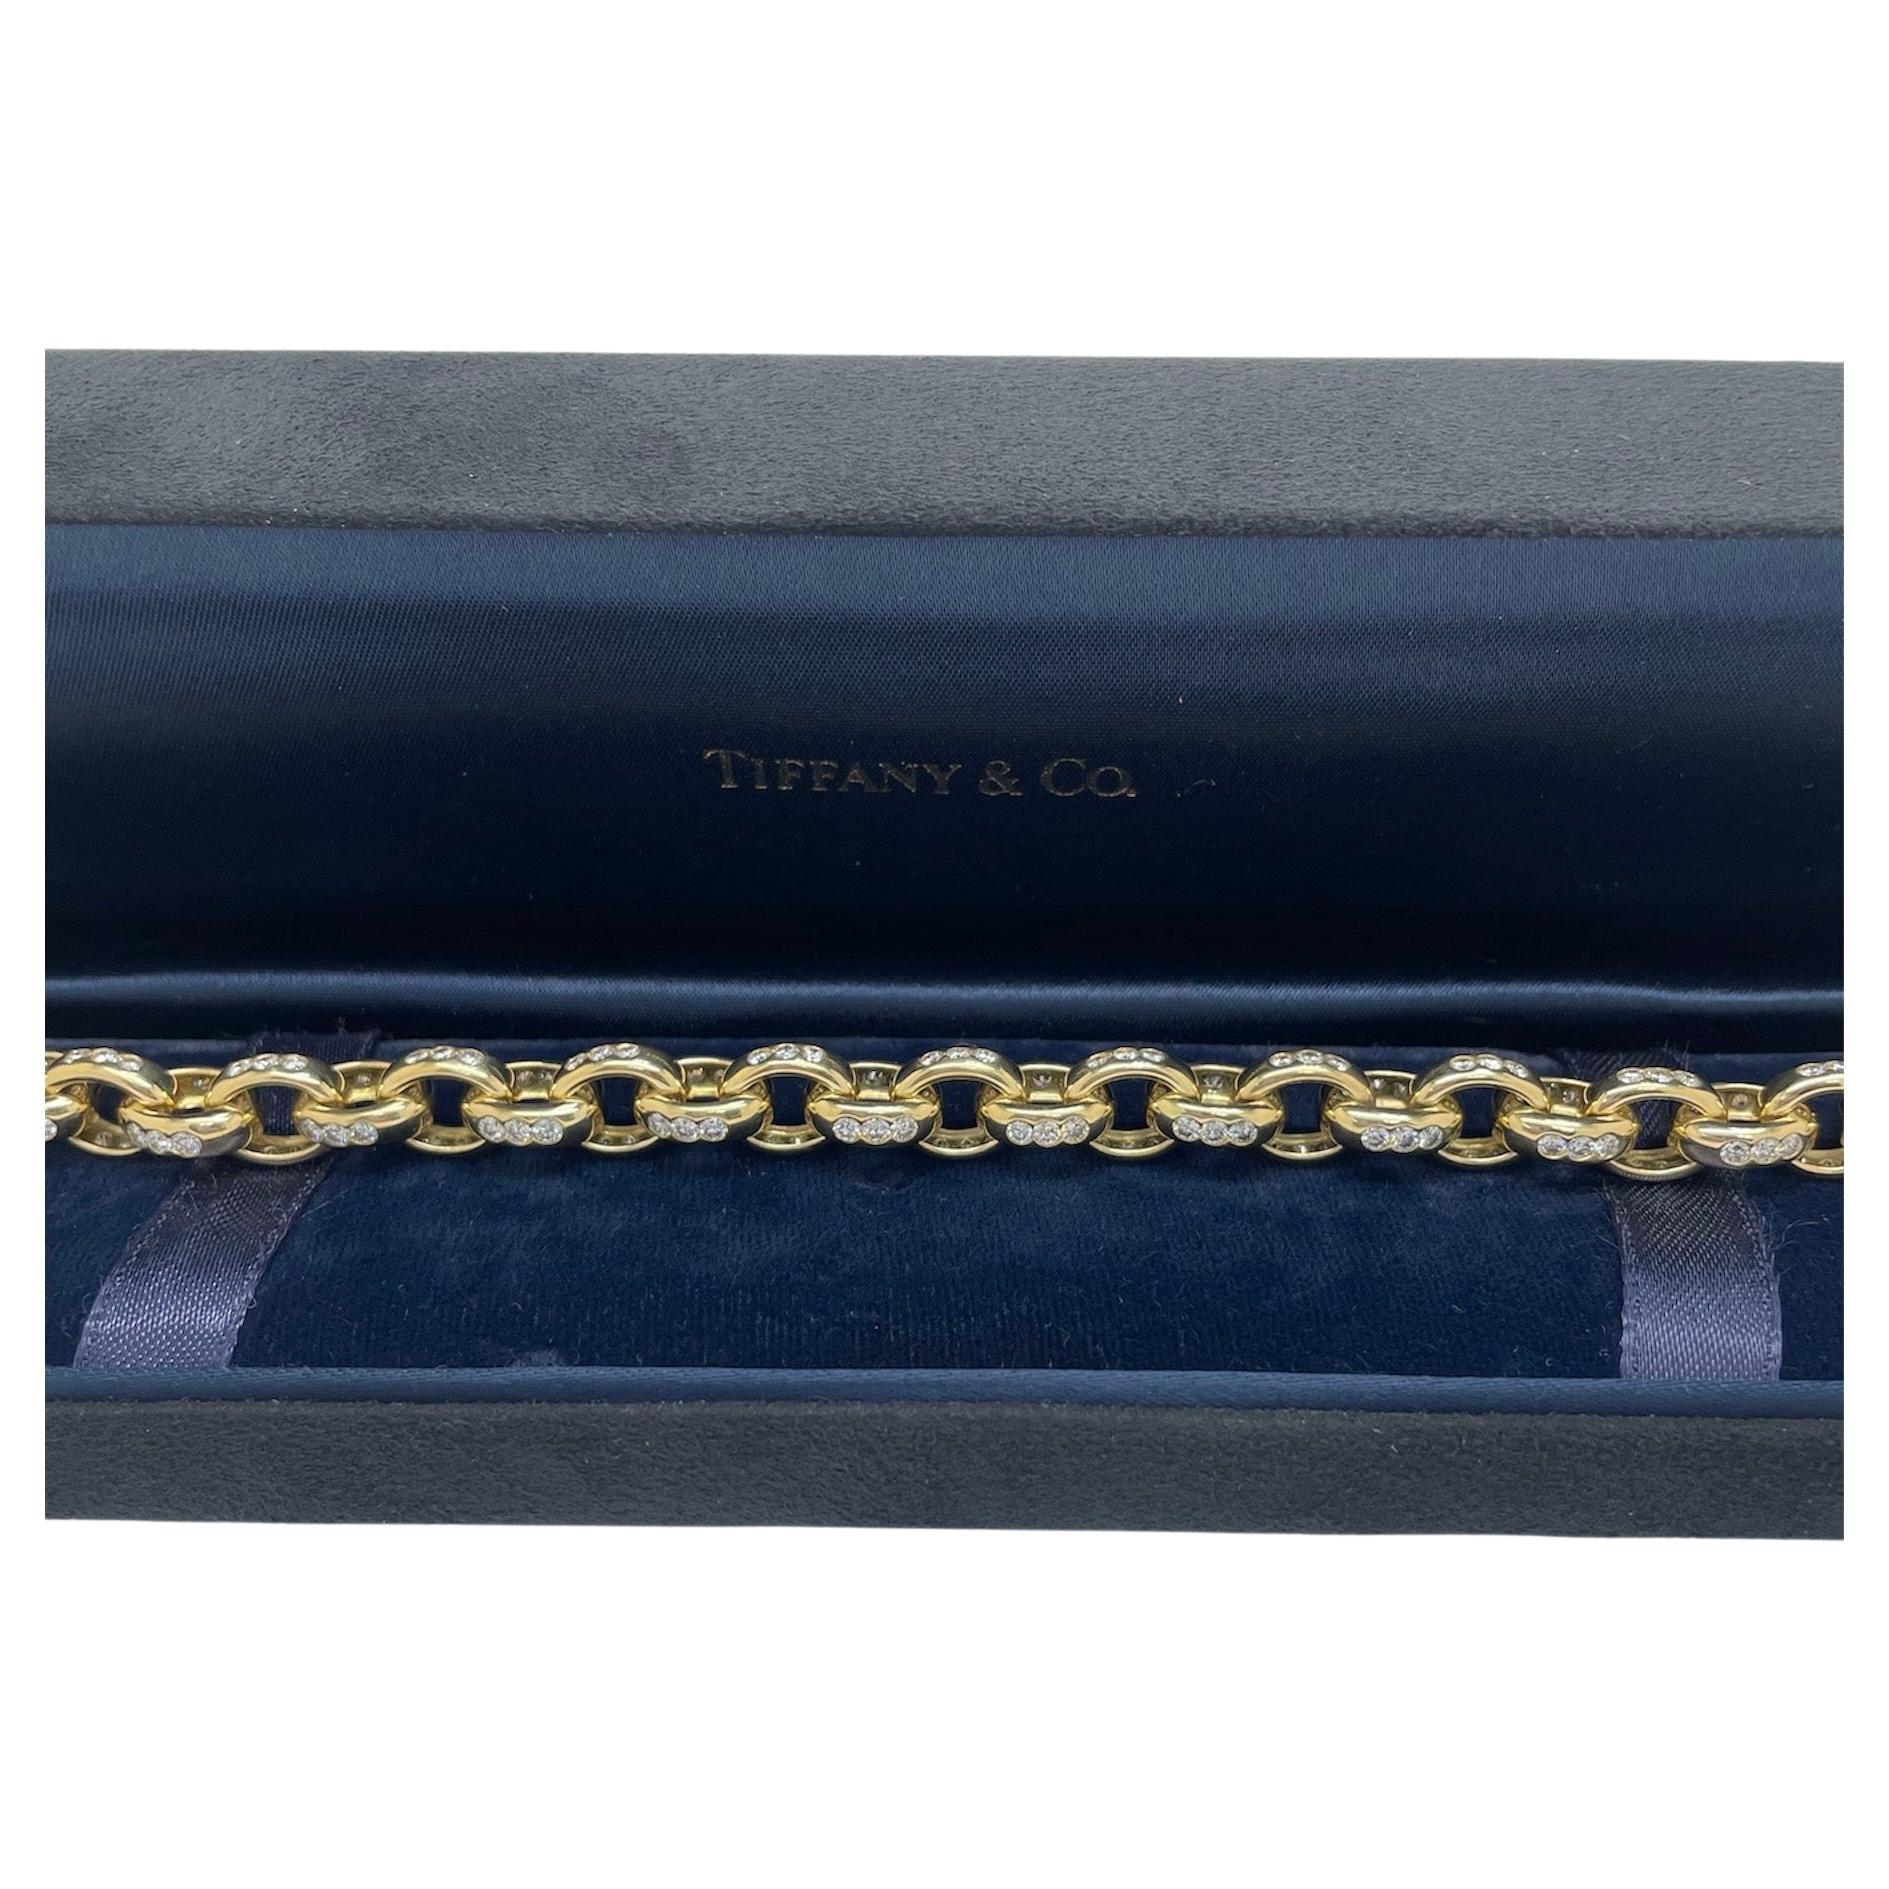 This classic bracelet by Tiffany & Co. is perfect for any outfit! Skillfully crafted cable links decorated with top quality flush bezel set round brilliant cut diamonds with a total weight of 6.00 carats. Very comfortable and extremely wearable